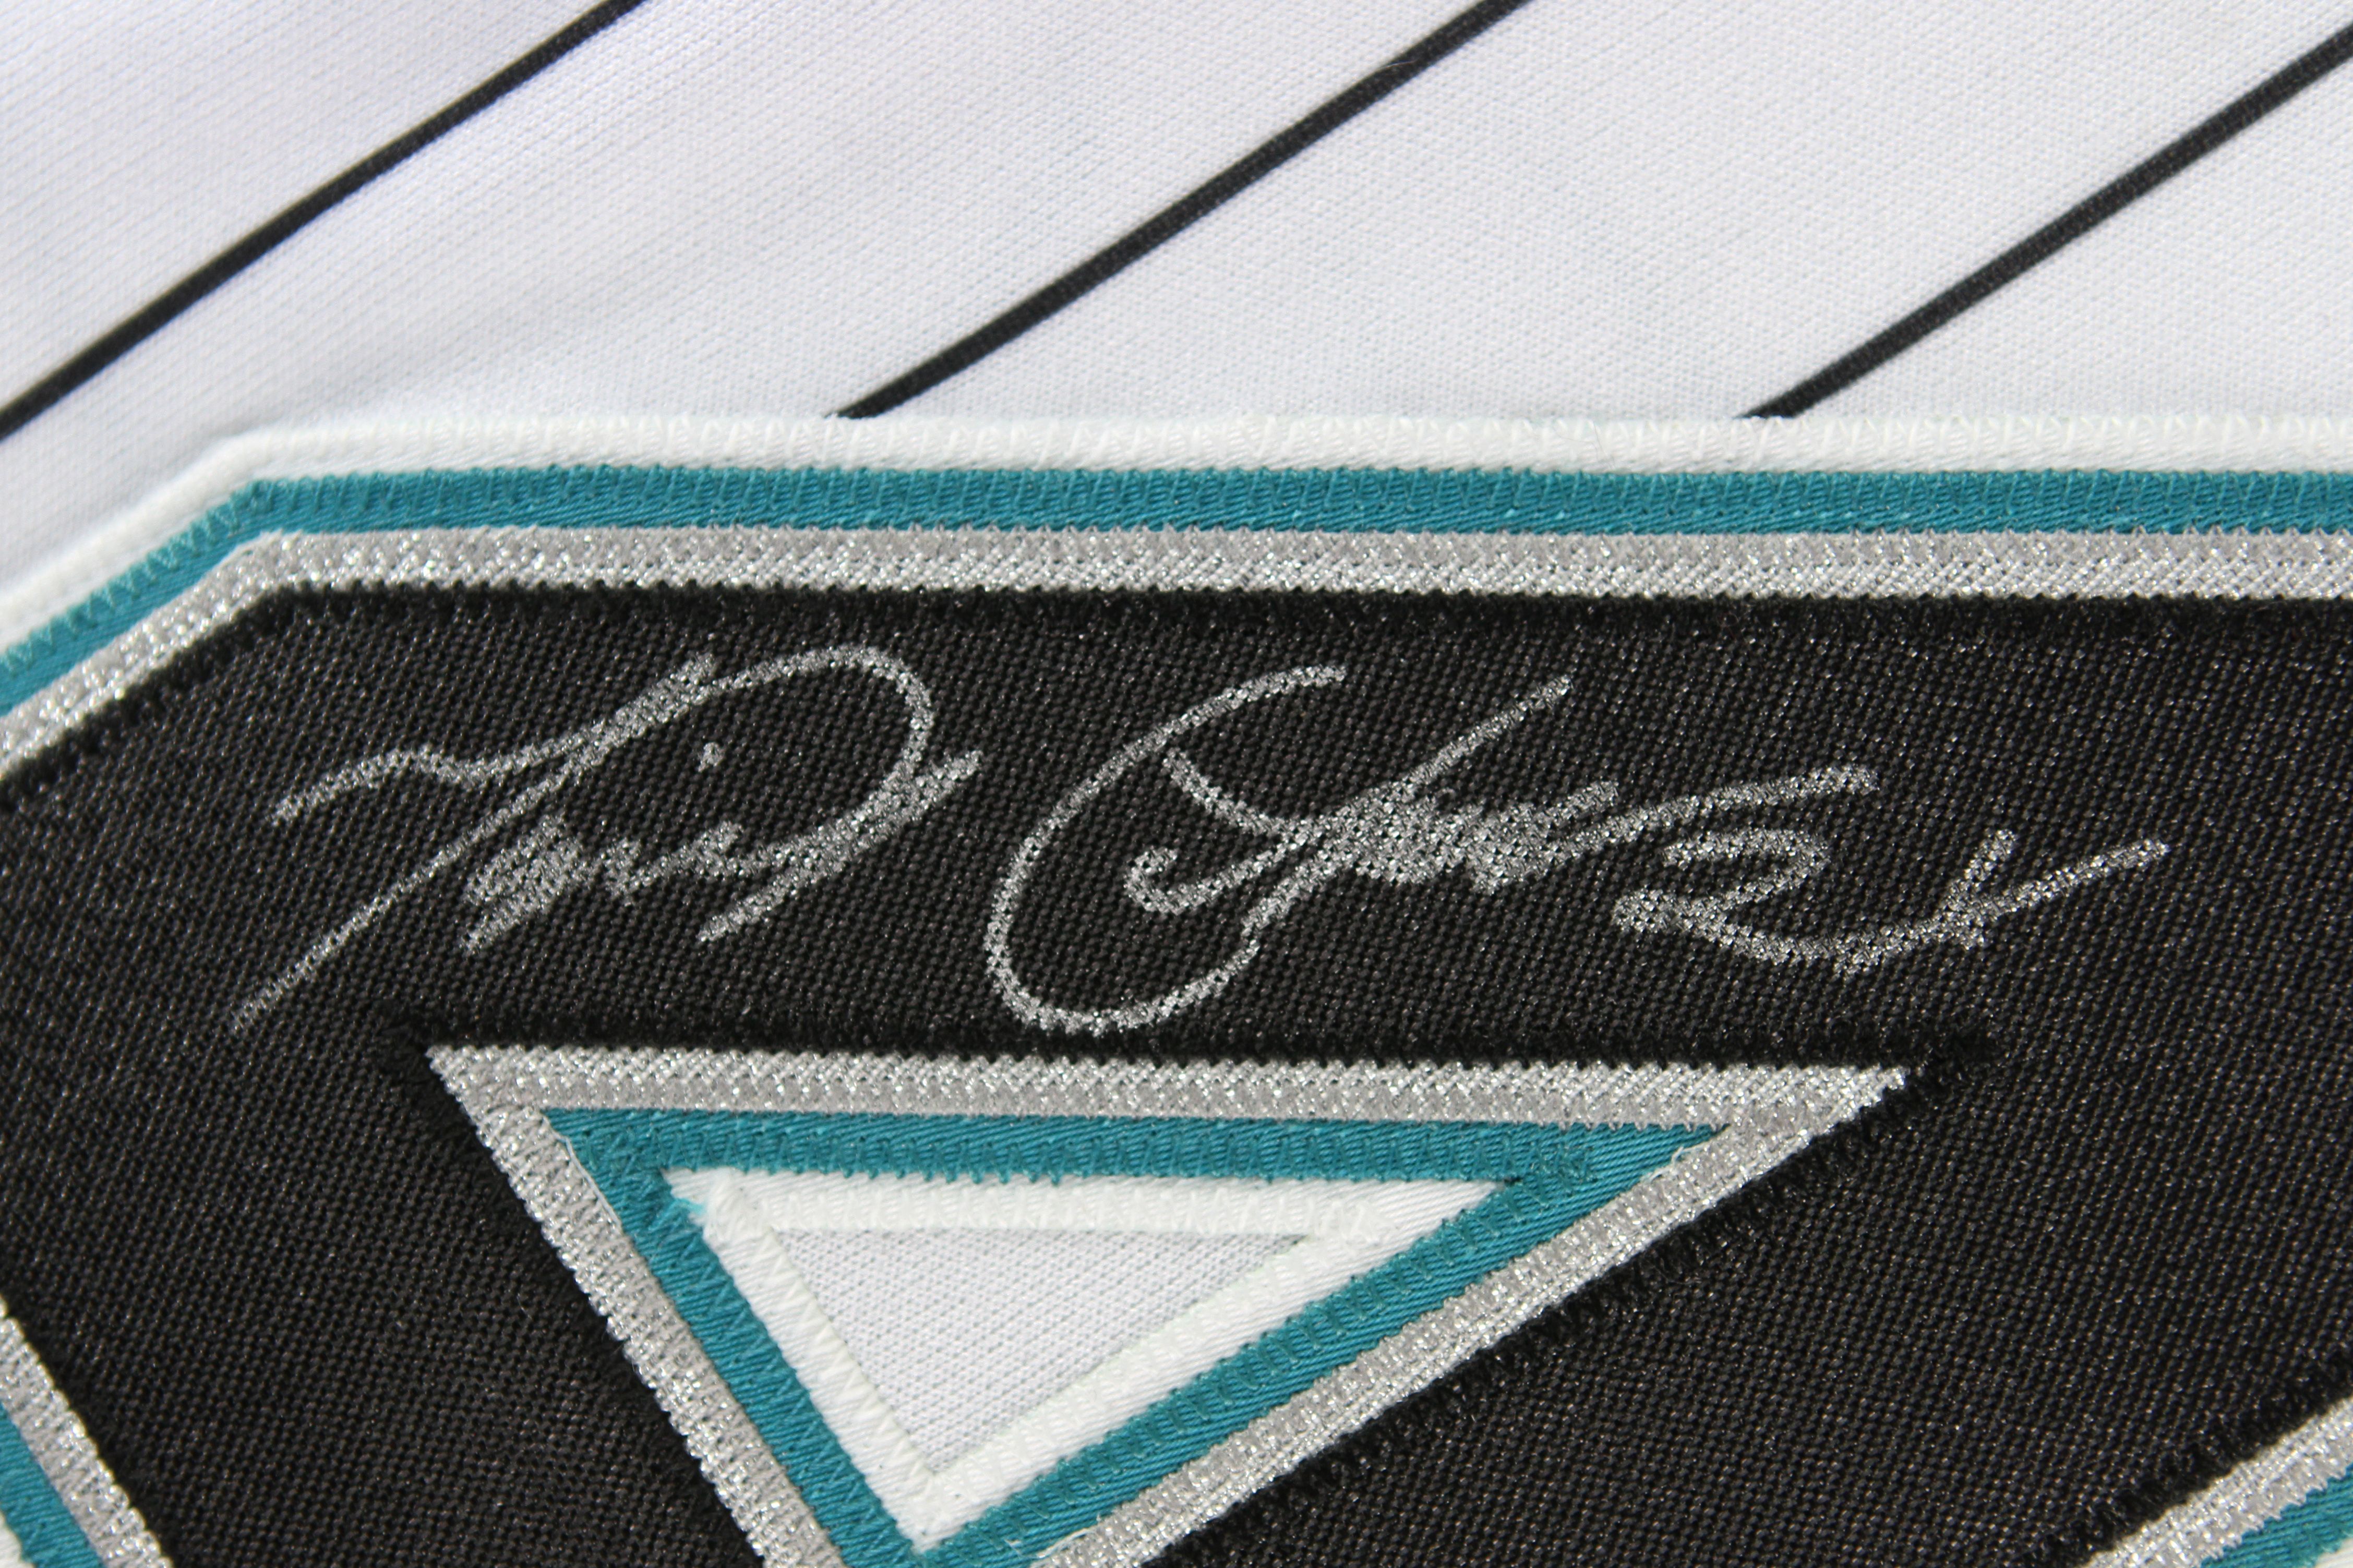 Signed Game Used MIGUEL CABRERA Florida Marlins Home Jersey JSA COA MLB HOLO